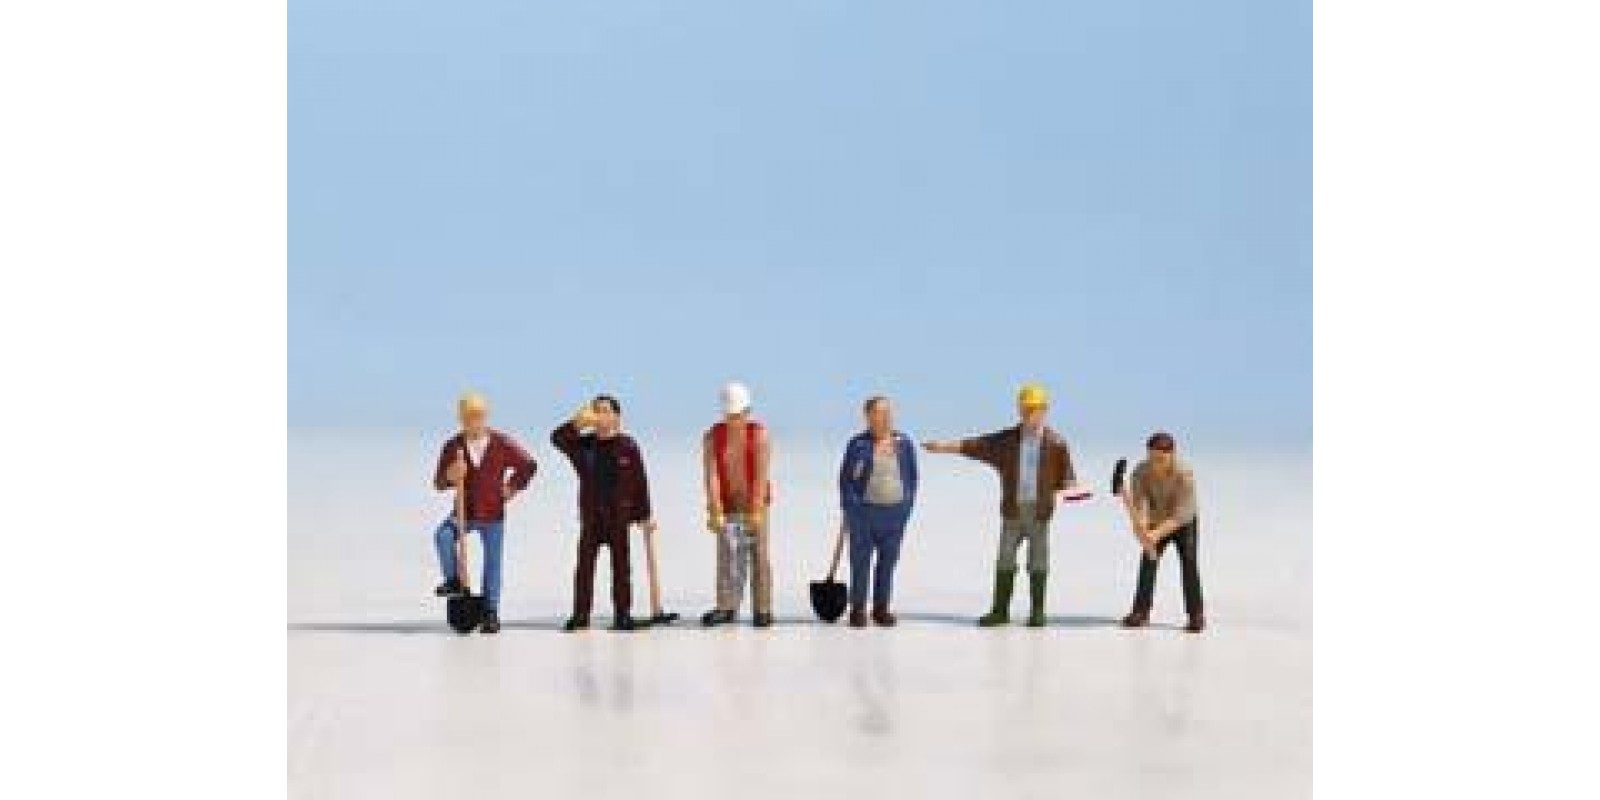 NO15110 Construction Workers, H0, 6 figures